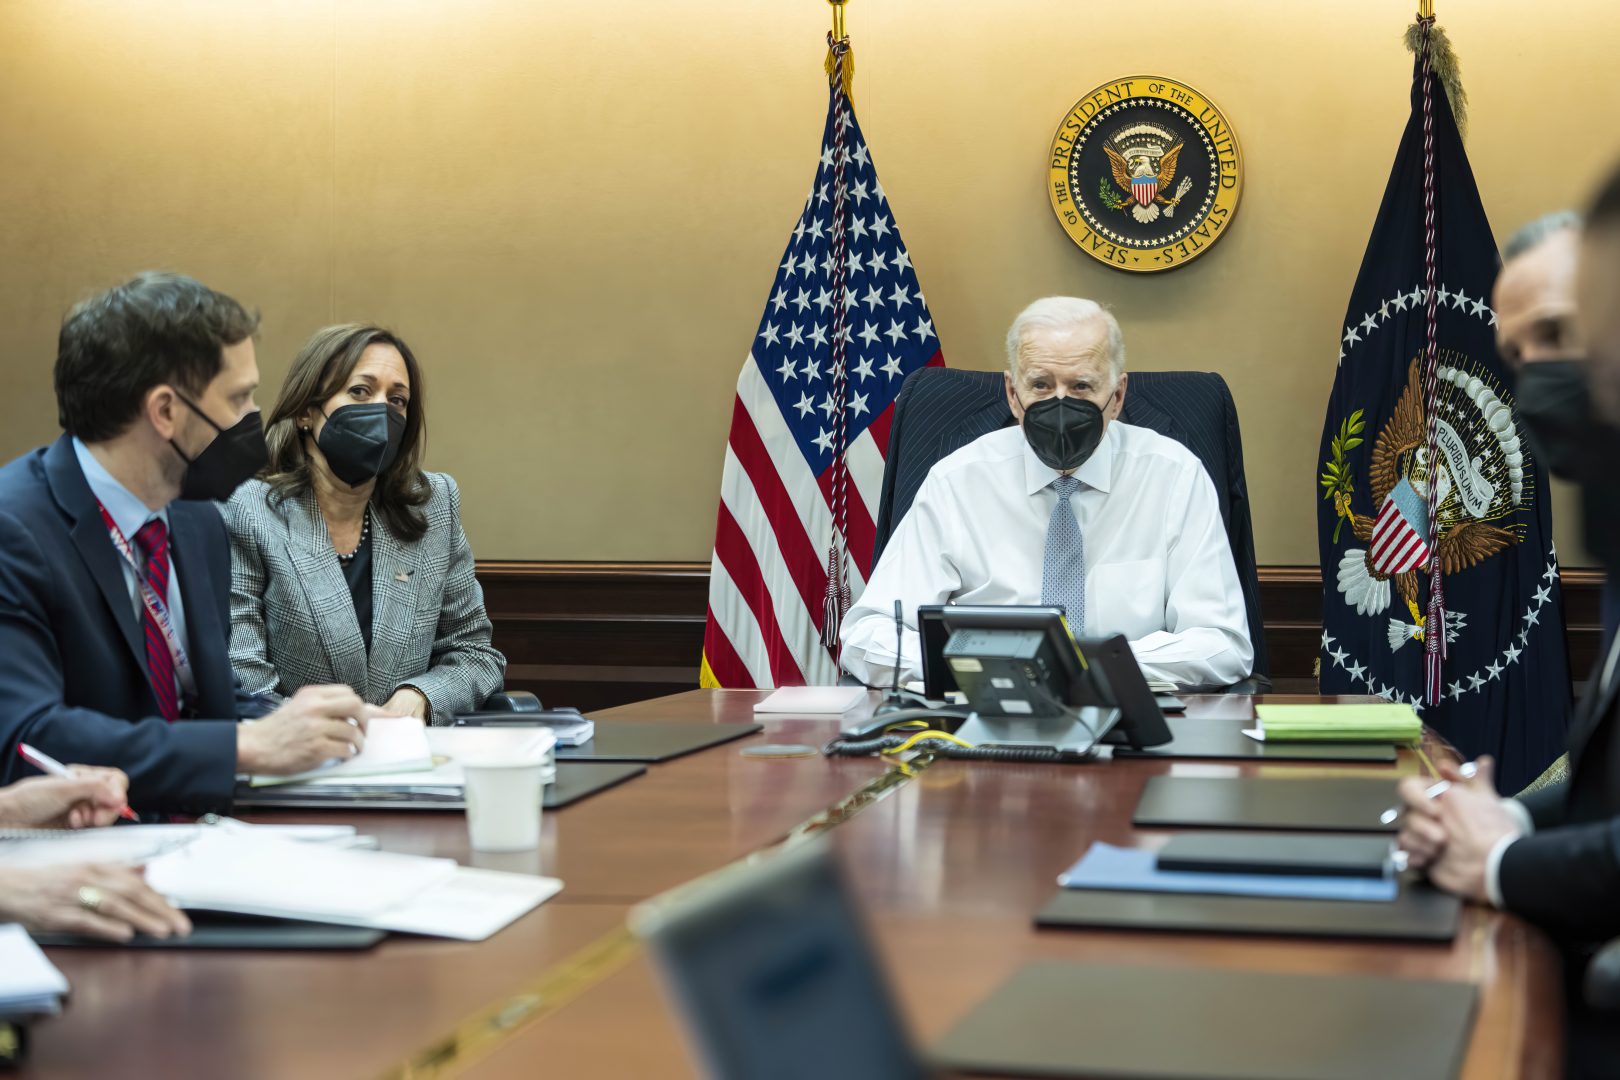 In this image provided by The White House, President Joe Biden and Vice President Kamala Harris and members of the President's national security team observe from the Situation Room at the White House in Washington, on Wednesday, Feb. 2, 2022, the counterterrorism operation responsible for removing from the battlefield Abu Ibrahim al-Hashimi al-Qurayshi, the leader of the Islamic State group. (Adam Schultz/The White House via AP)